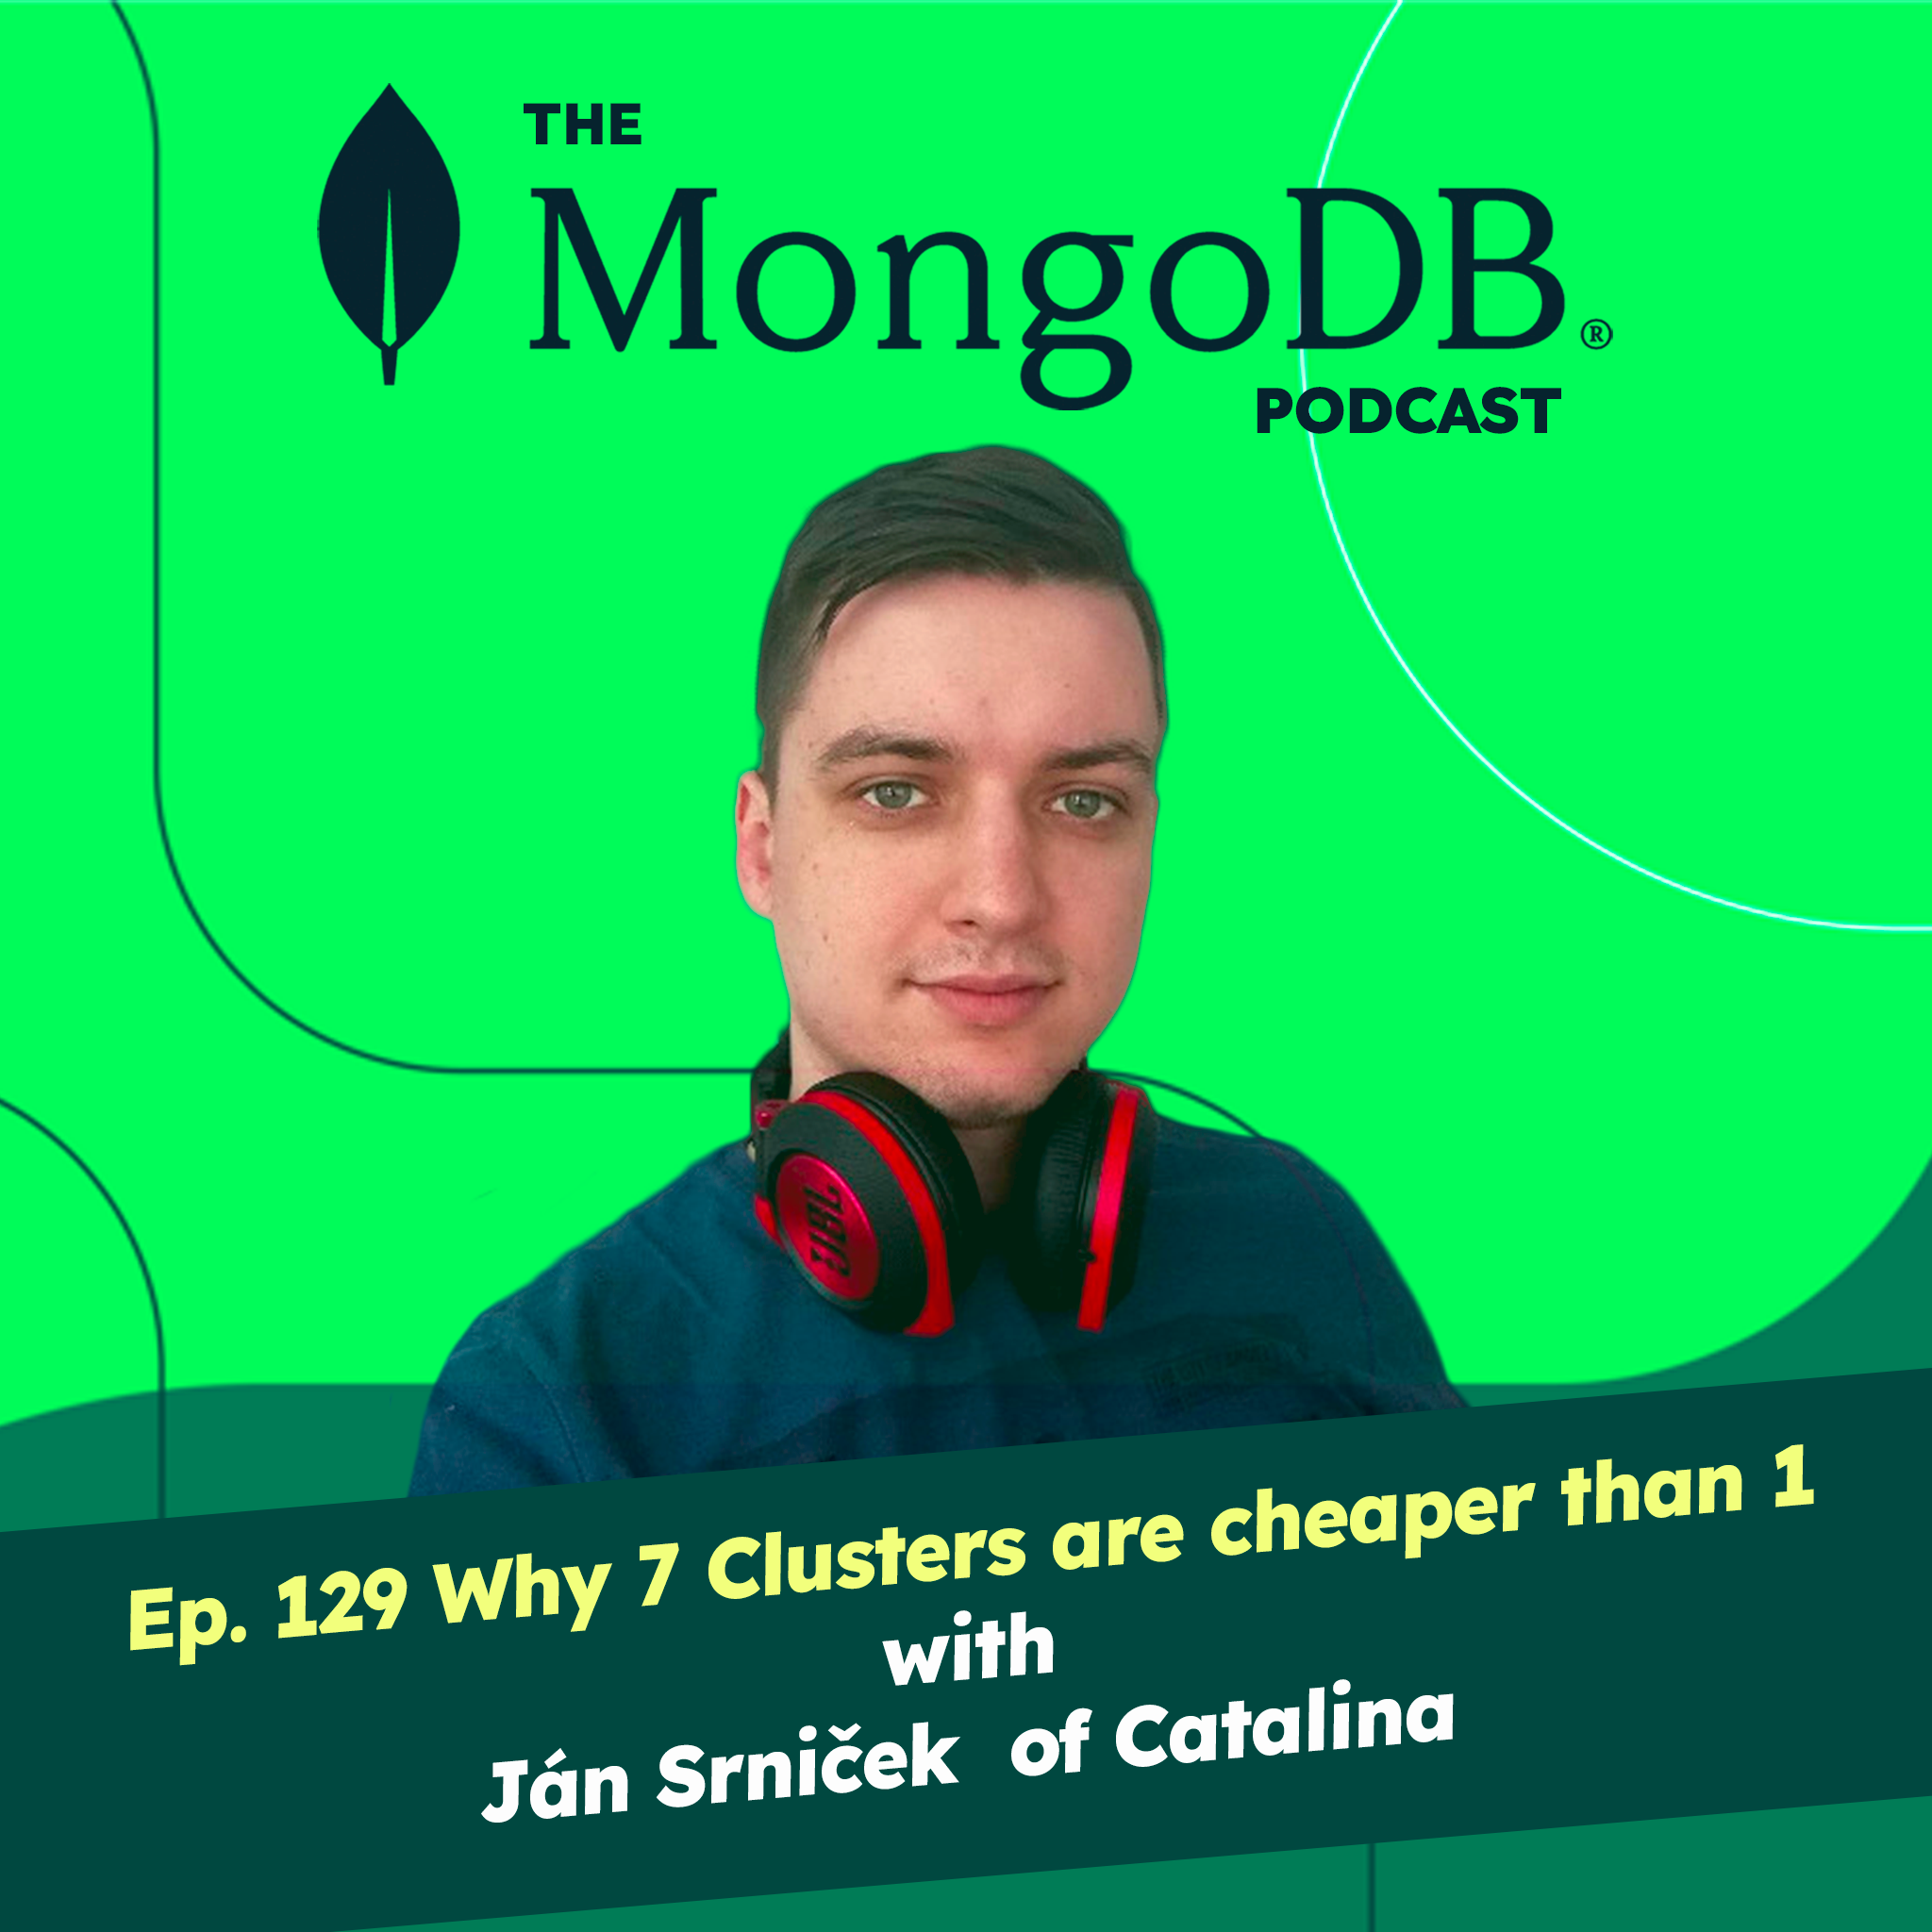 Ep 129 Why 7 Clusters are cheaper than 1